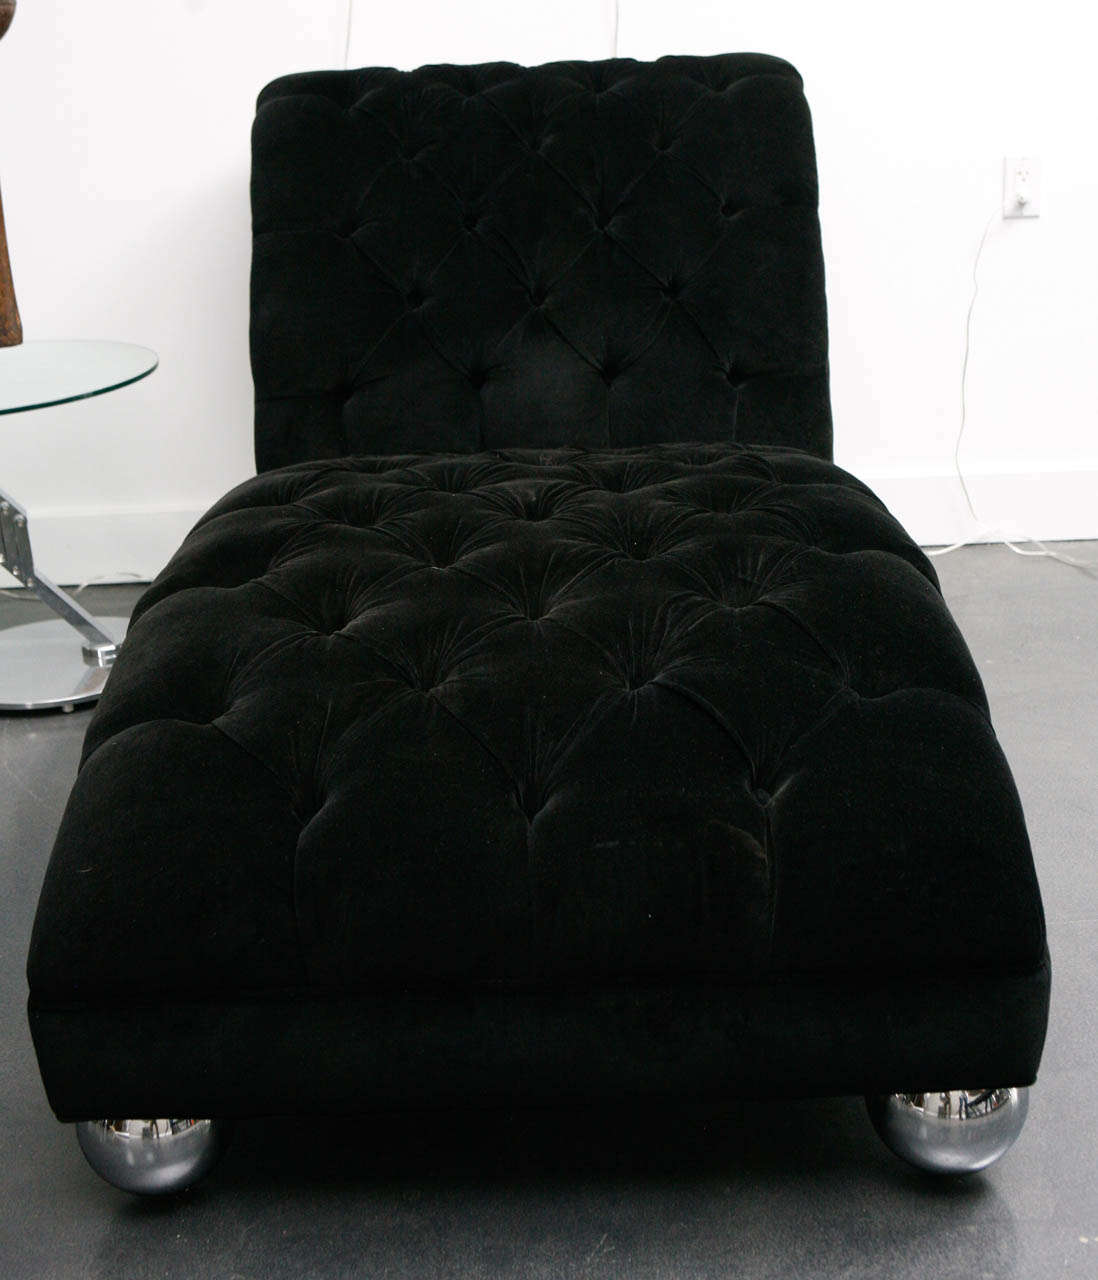 Beautiful vintage chaise lounge from the 1930s. Newly reupholstered in tufted black velvet. Featuring chrome orb feet.